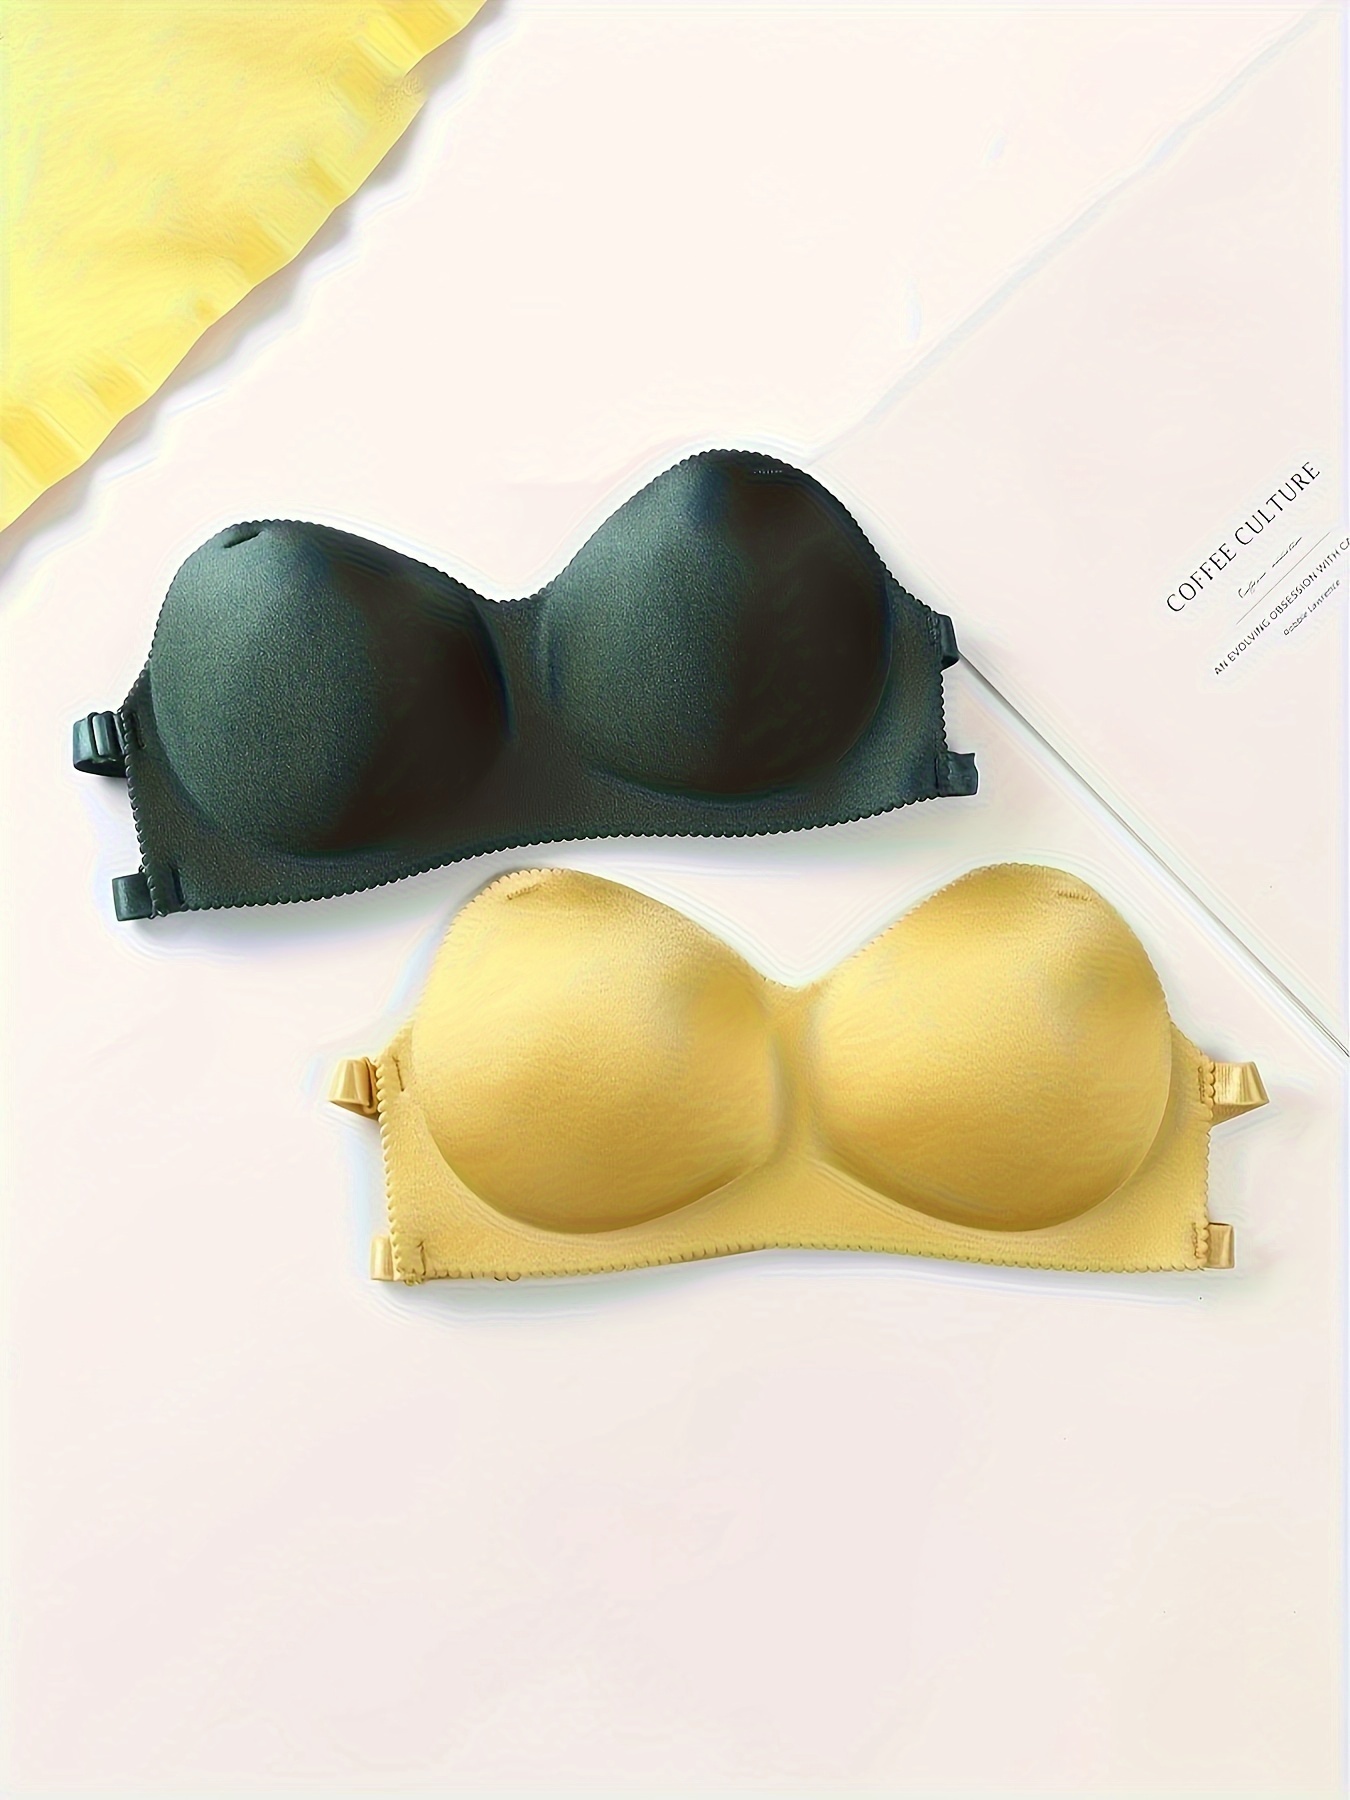 Finetoo Push Up Bra Women Strapless Sexy Lingerie Invisible